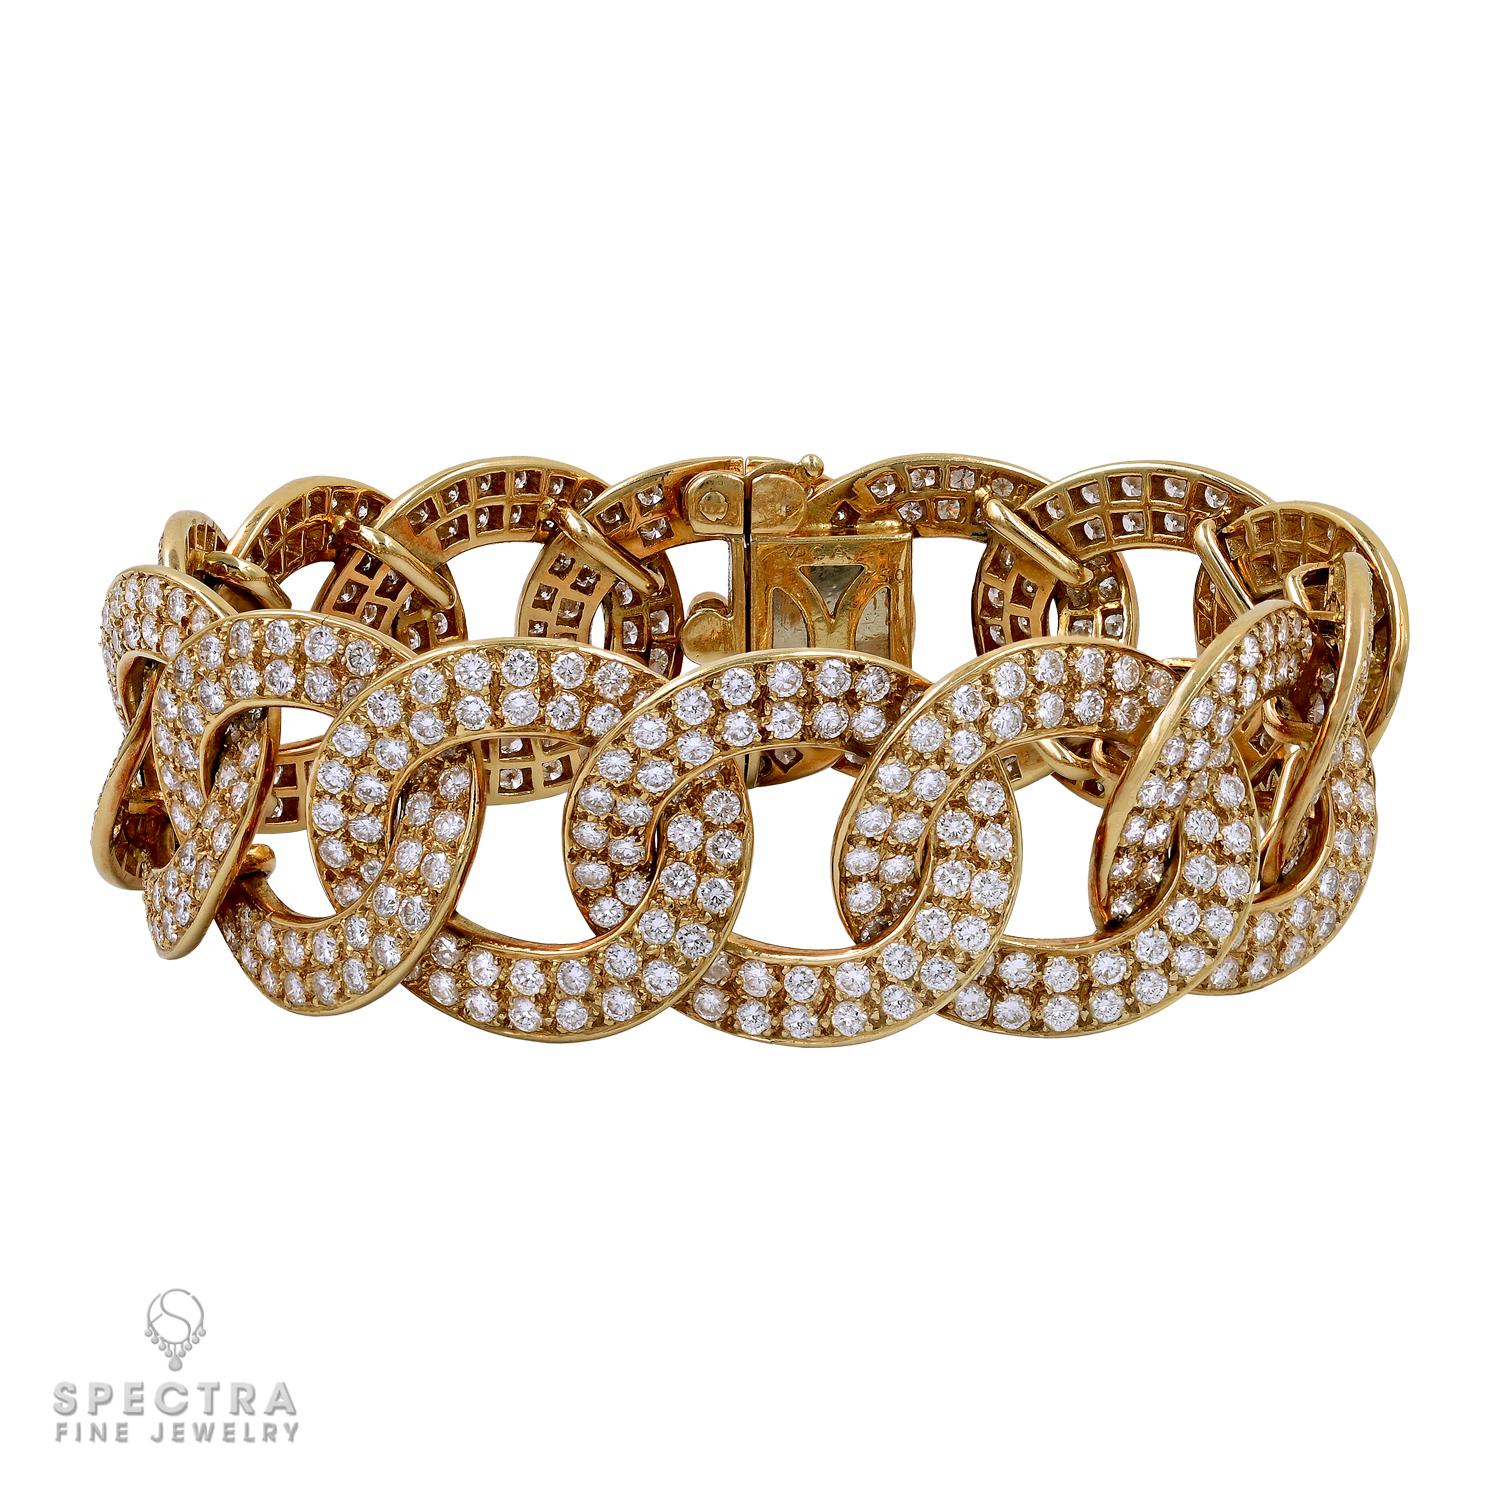 Van Cleef & Arpels Vintage Diamond 'Olympia' Bracelet is an exquisite piece of jewelry that exudes timeless elegance. Crafted during the illustrious 1970s, this bracelet is a true testament to the masterful craftsmanship of the renowned French